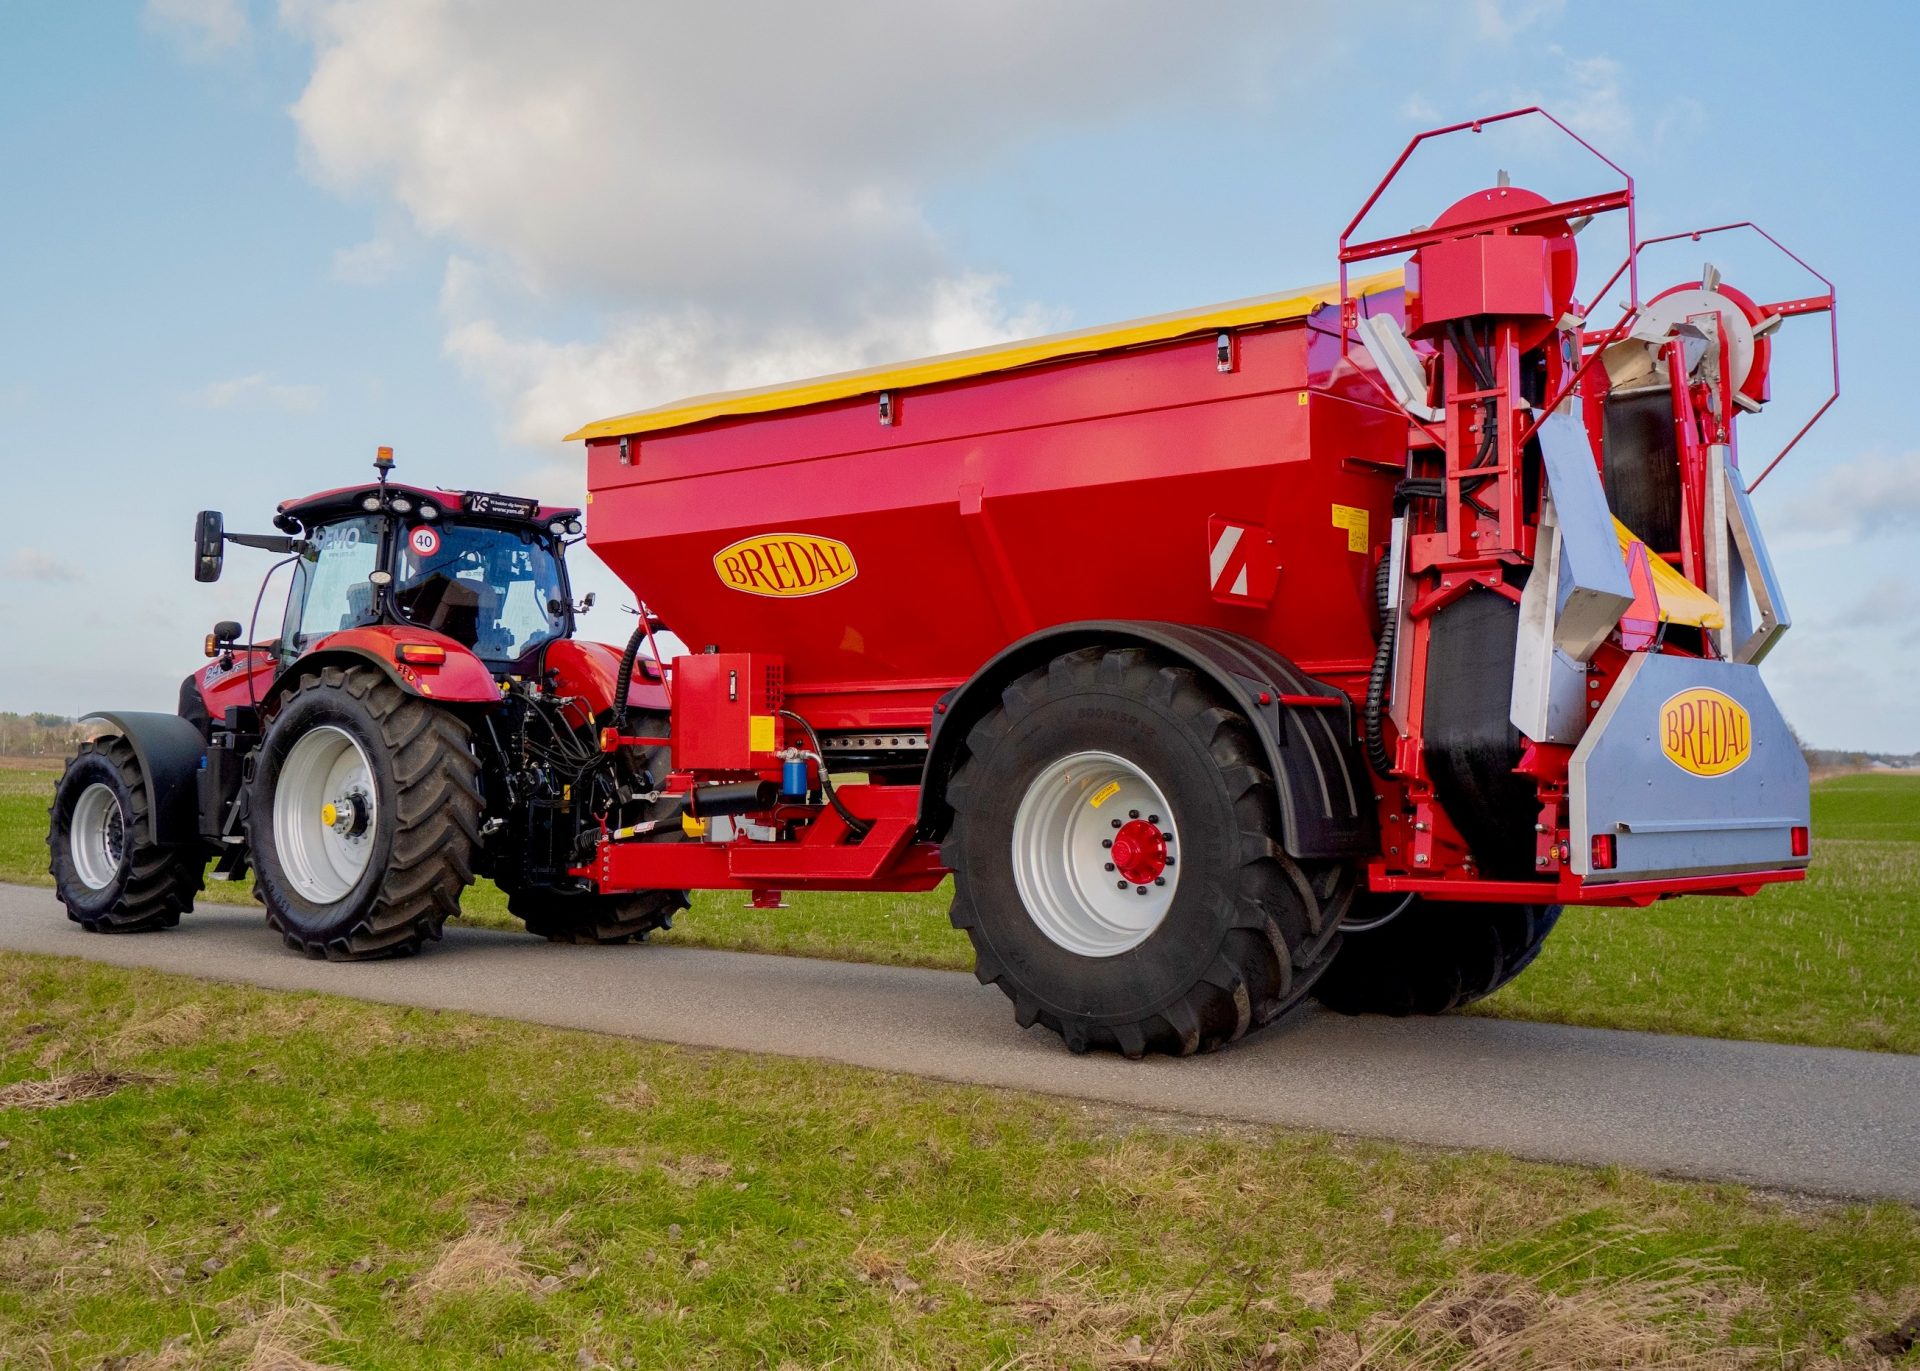 Larger tyres on latest Bredal spreader